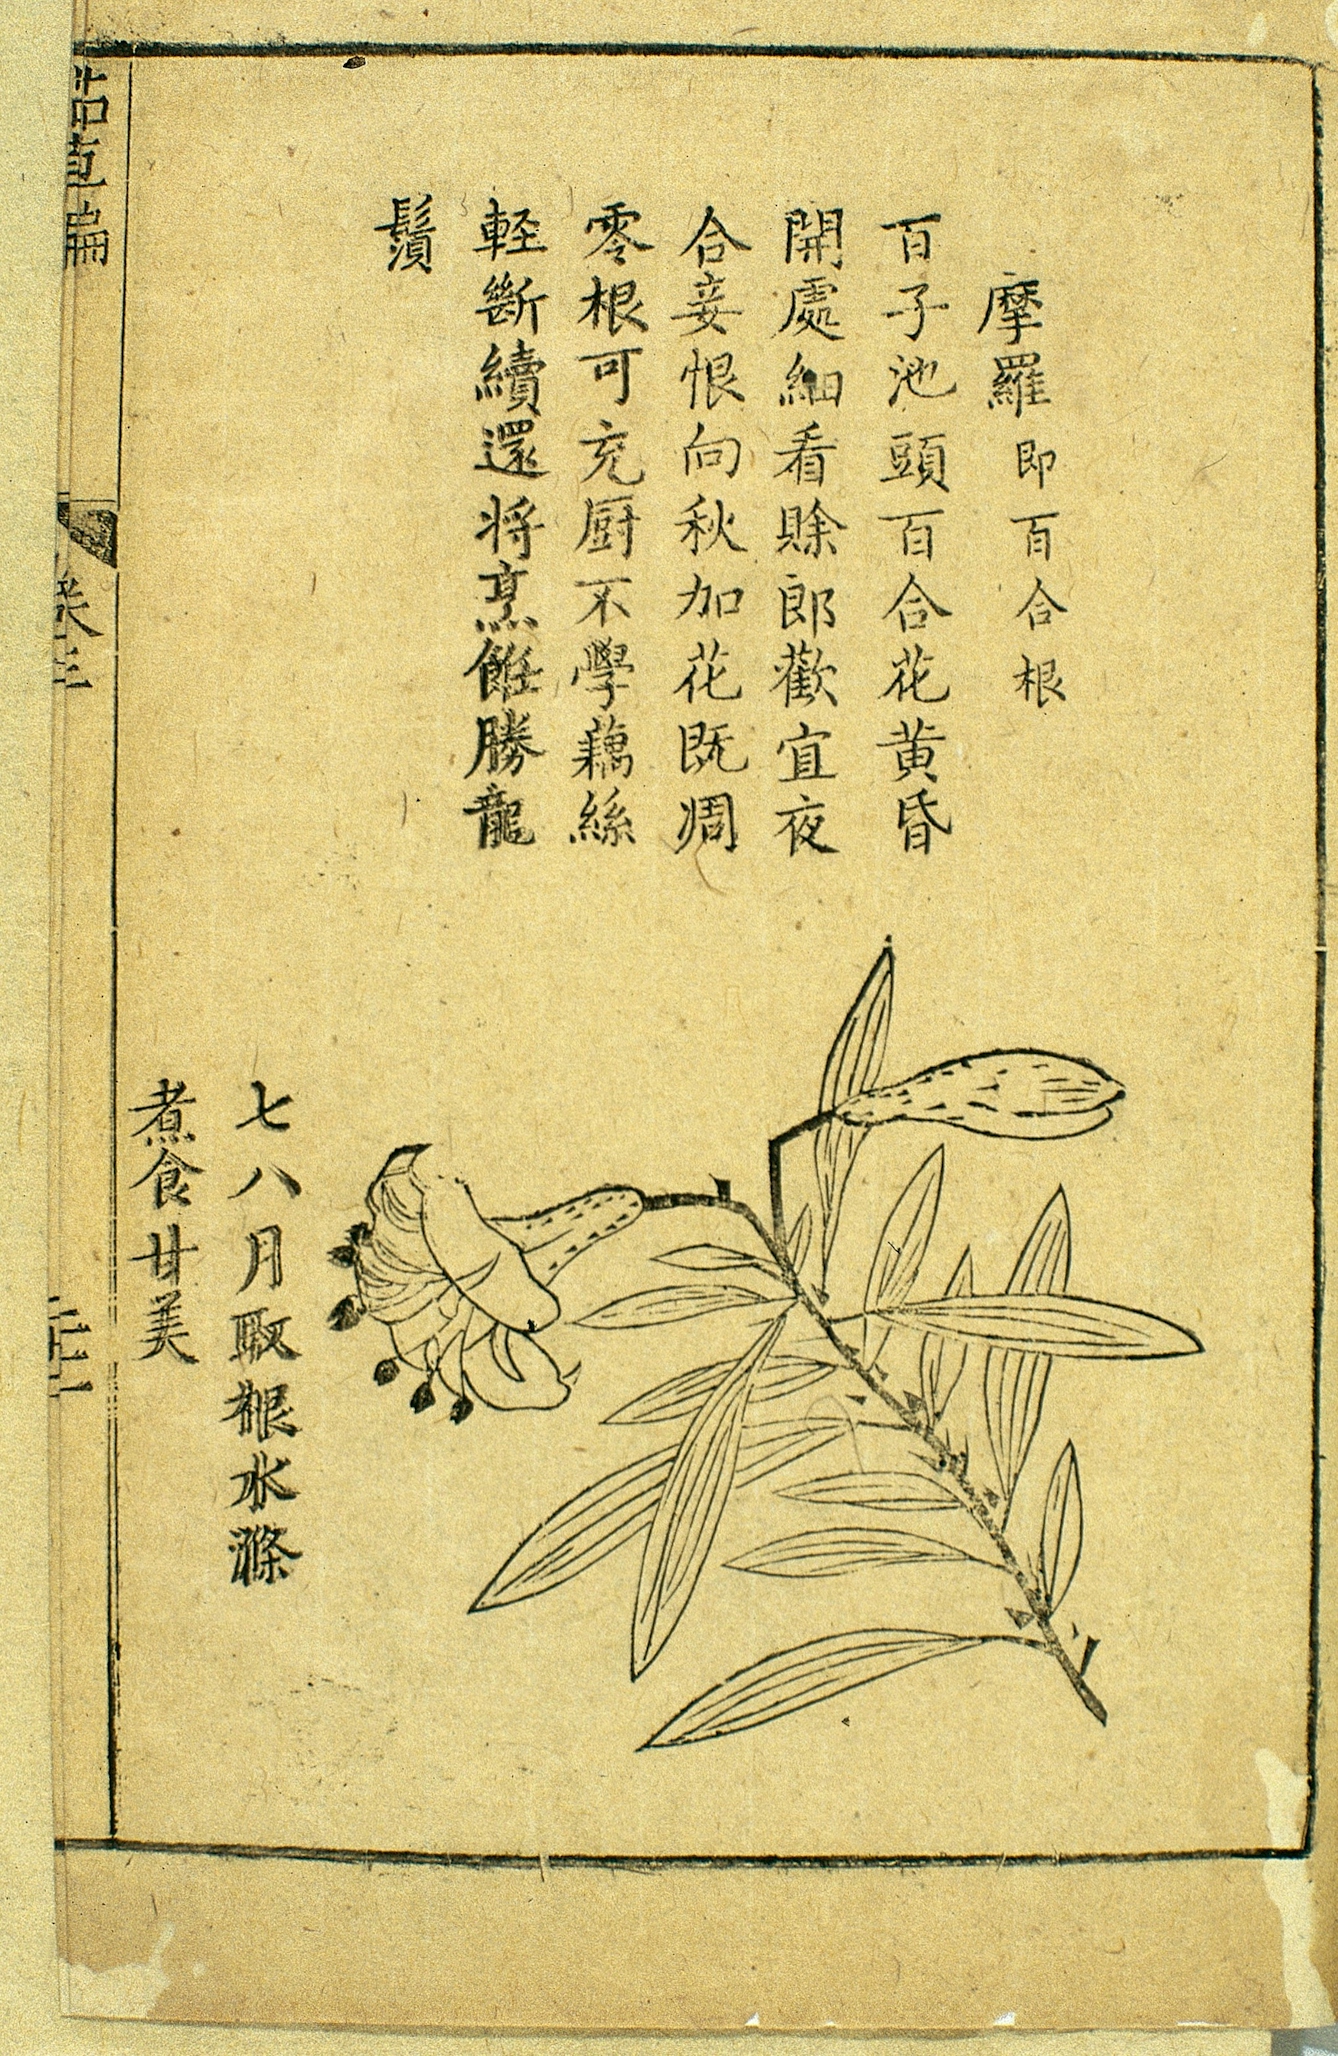 Woodcut and explanatory verse depicting moluo (lily root). A translation of the verse reads: By Hundred Seeds Lake a hundred lilies bloom/ When the flowers open at dusk, they are well worth a closer look/ The young man looks forward to a night-time tryst, but the lady is reluctant/ When autumn comes the last flowers will all have withered away. [which is followed by] The root can be used in cooking/ It is not as fibrous as lotus root/ whose filaments remain intact when it is broken up/ When well cooked it is better than dragon's whiskers (longxu).